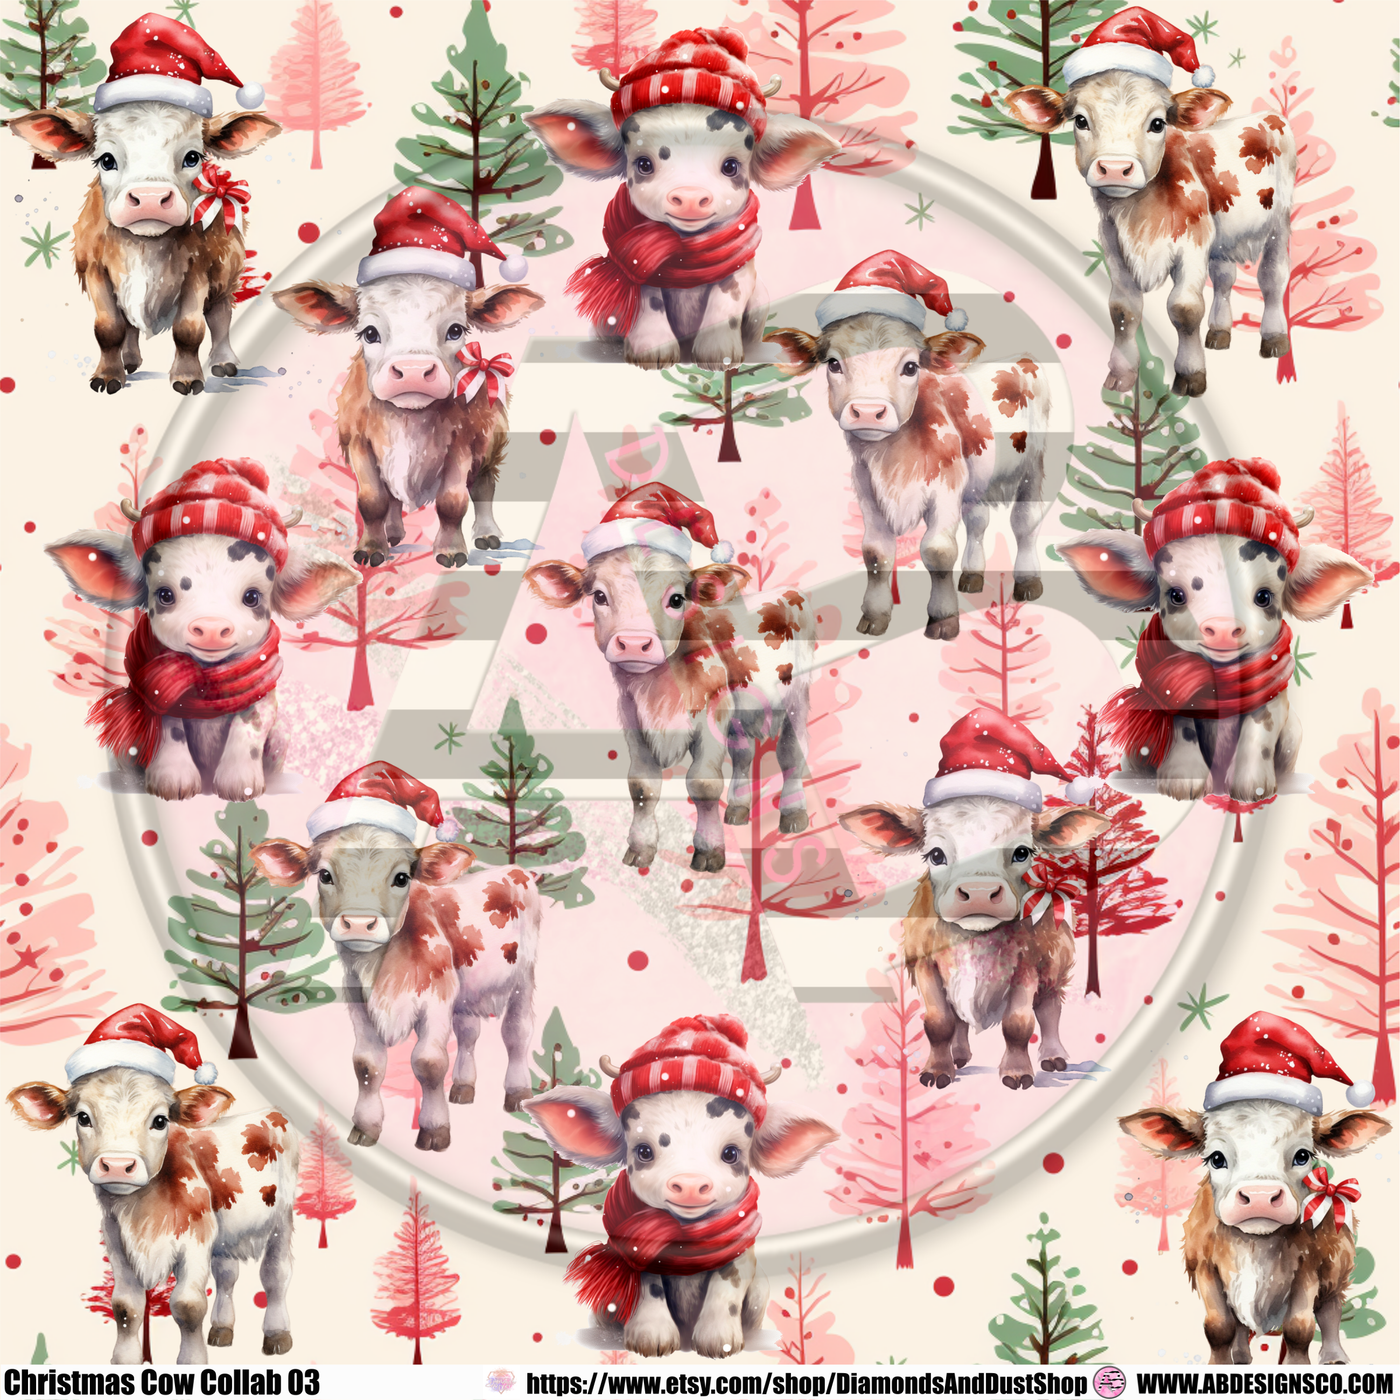 Adhesive Patterned Vinyl - Christmas Cow Collab 03